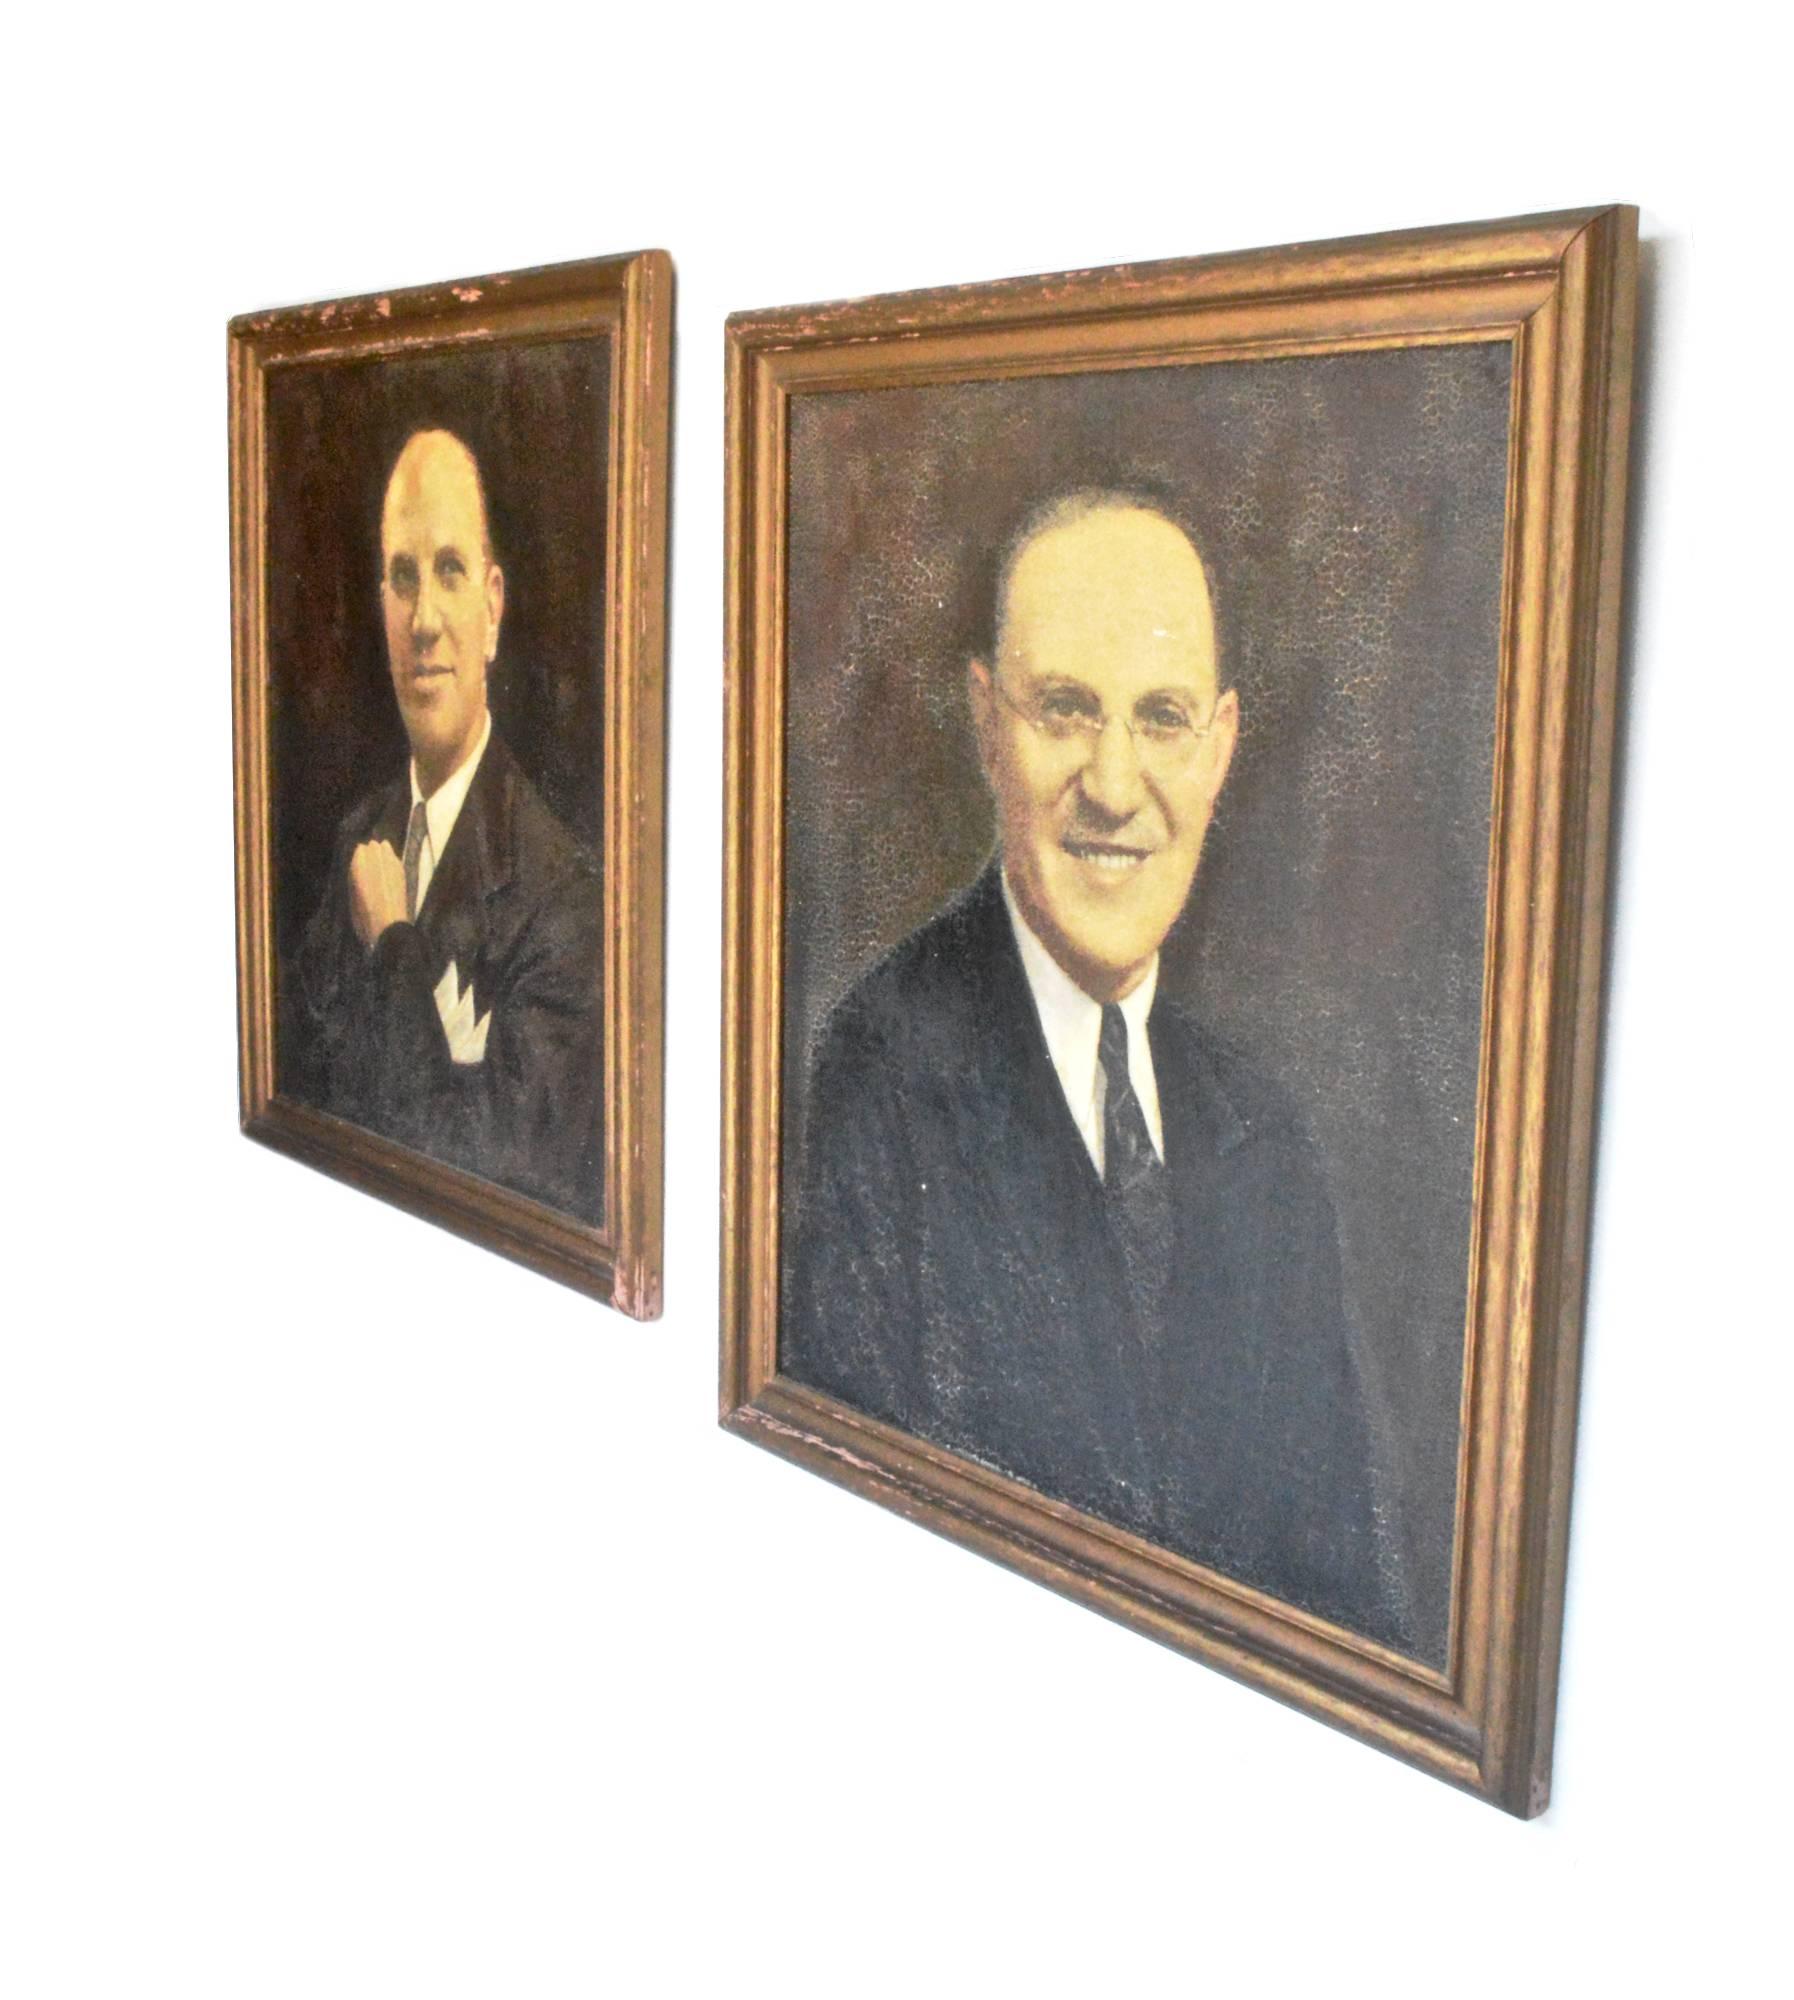 Oil on board portraits of a pair gentleman. Both men possess a warm and caring look. Perhaps companions for life these two? Canvas stretched over masonite board shows crackle, foxing and losses. Frames show distress and gentle losses. Artist